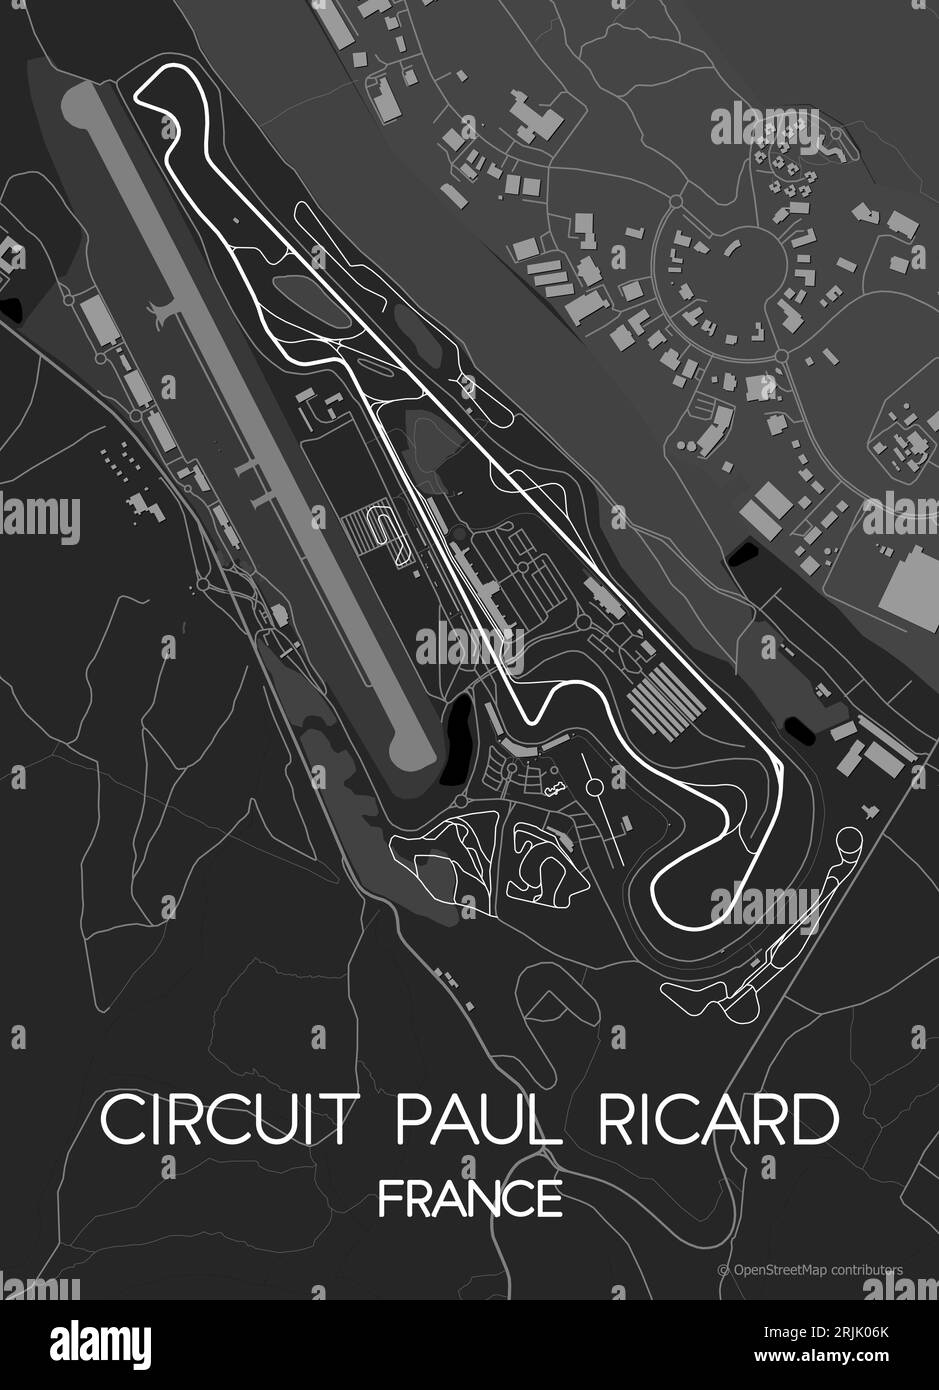 Poster map of Circuit Paul Ricard, France Stock Vector